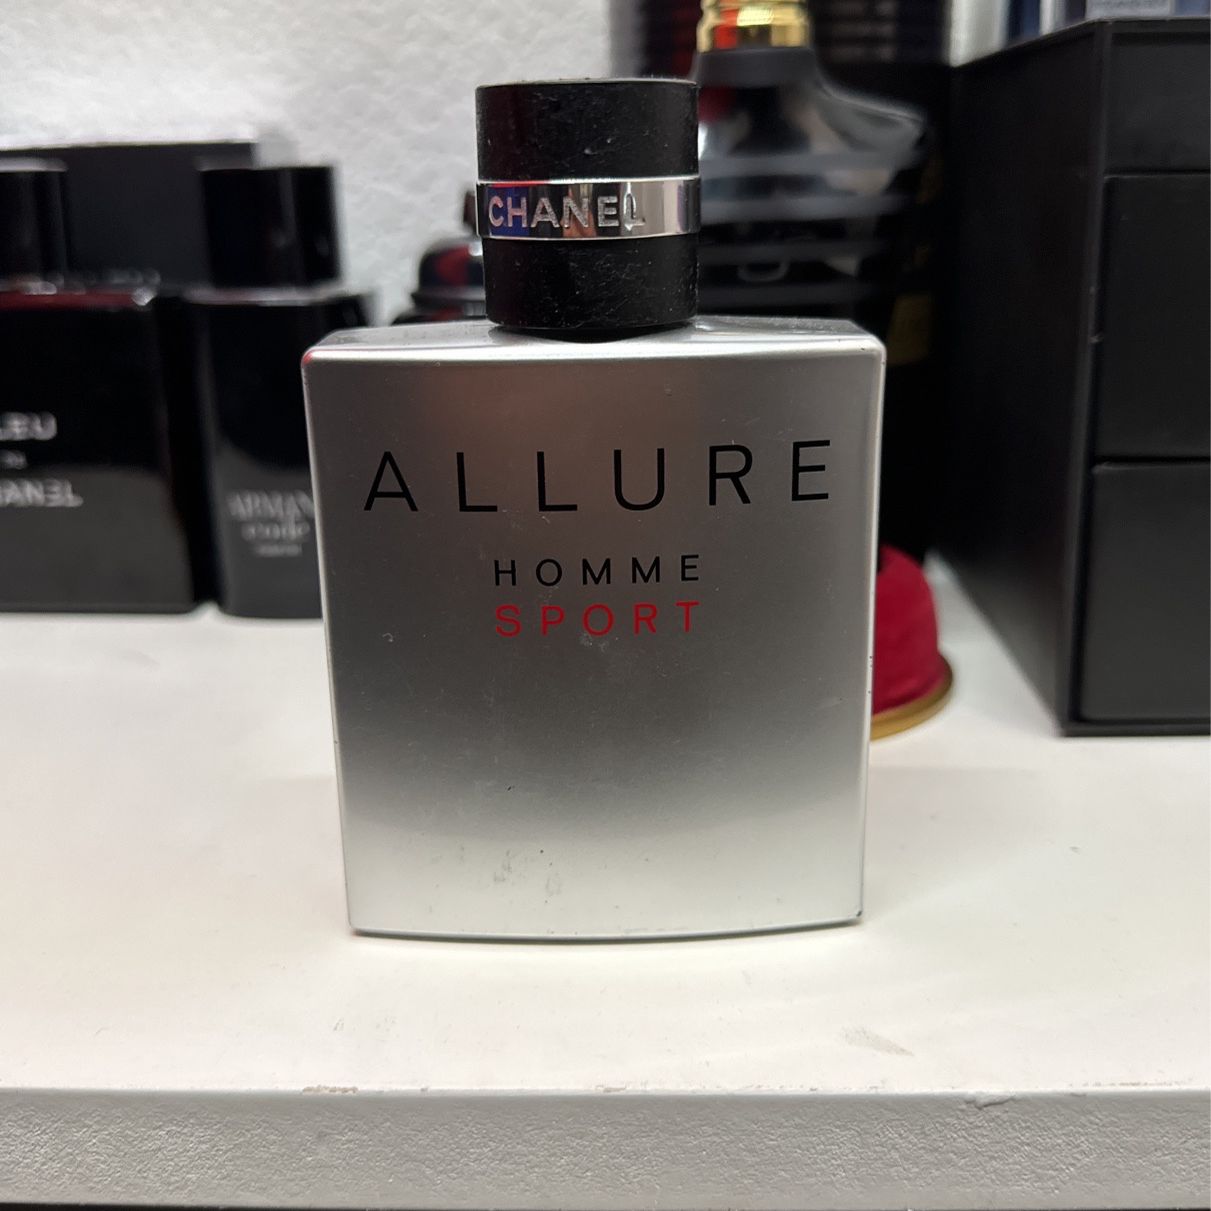 Chanel Allure Homme Sport After Shave Splash 100ml/3.4oz 100ml/3.4oz buy in  United States with free shipping CosmoStore